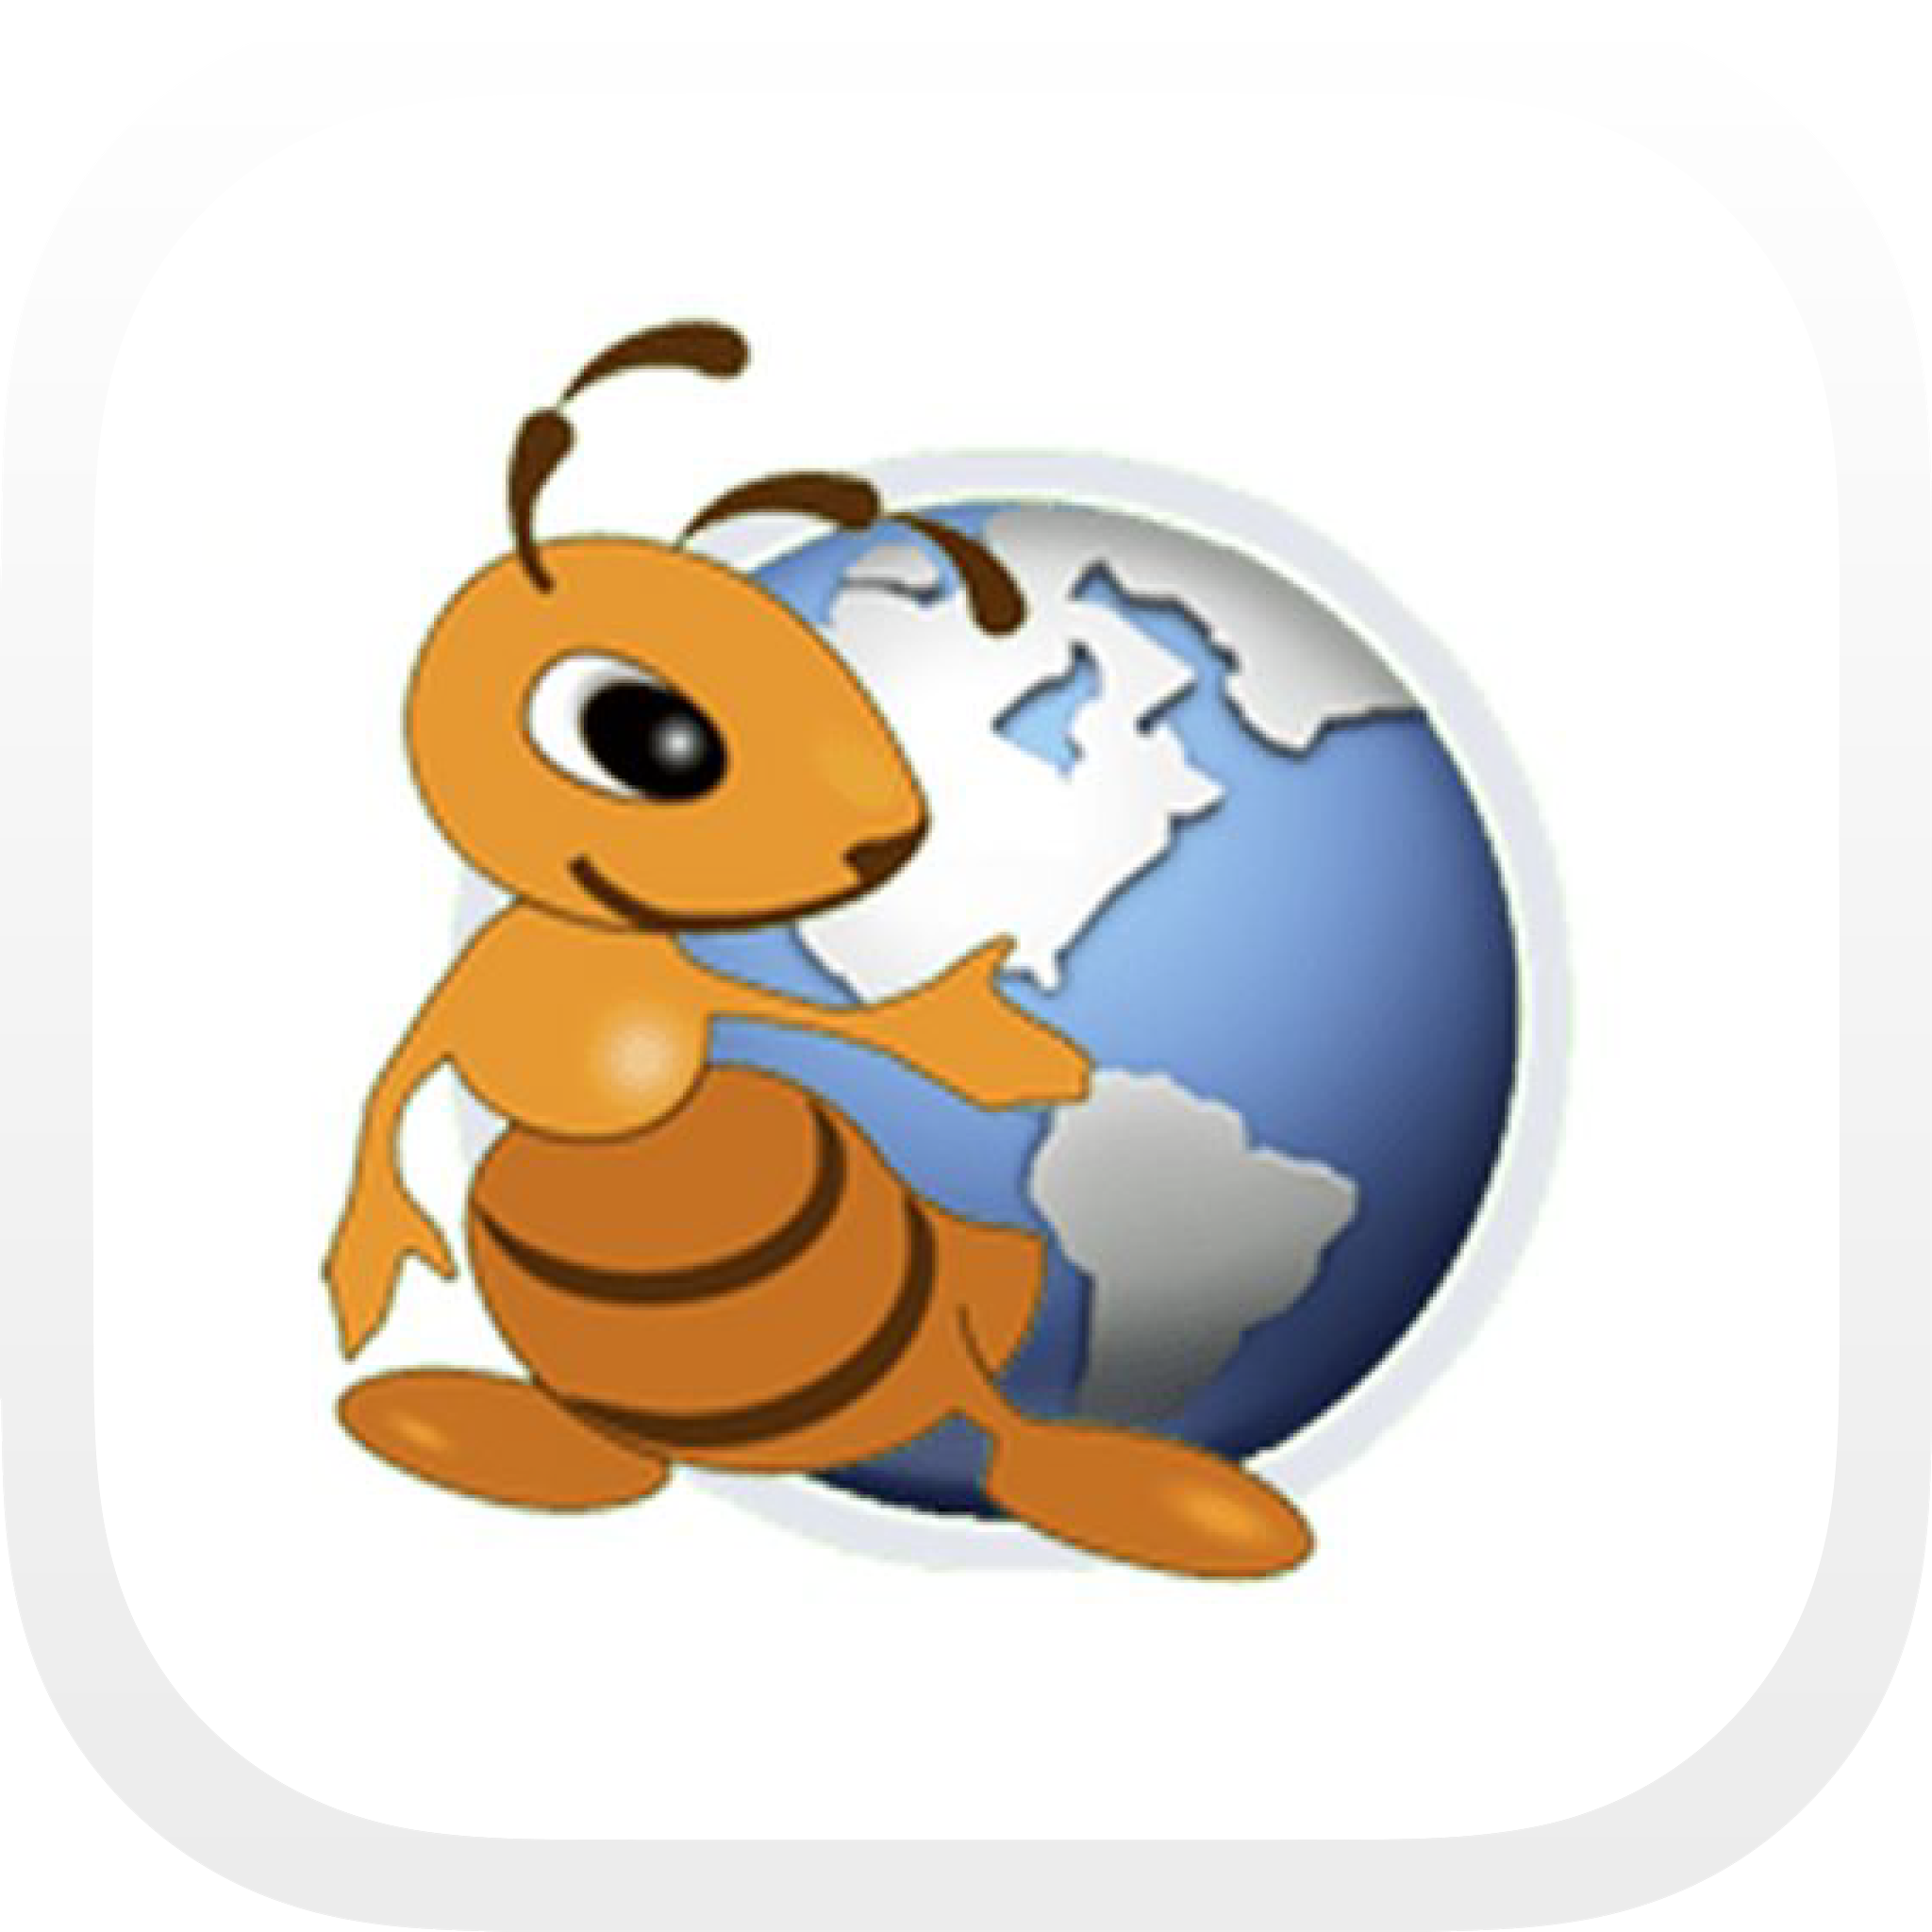 Ant download manager pro. Ant download Manager. Ant download. Ant-con магнитофрн. Ant browser.